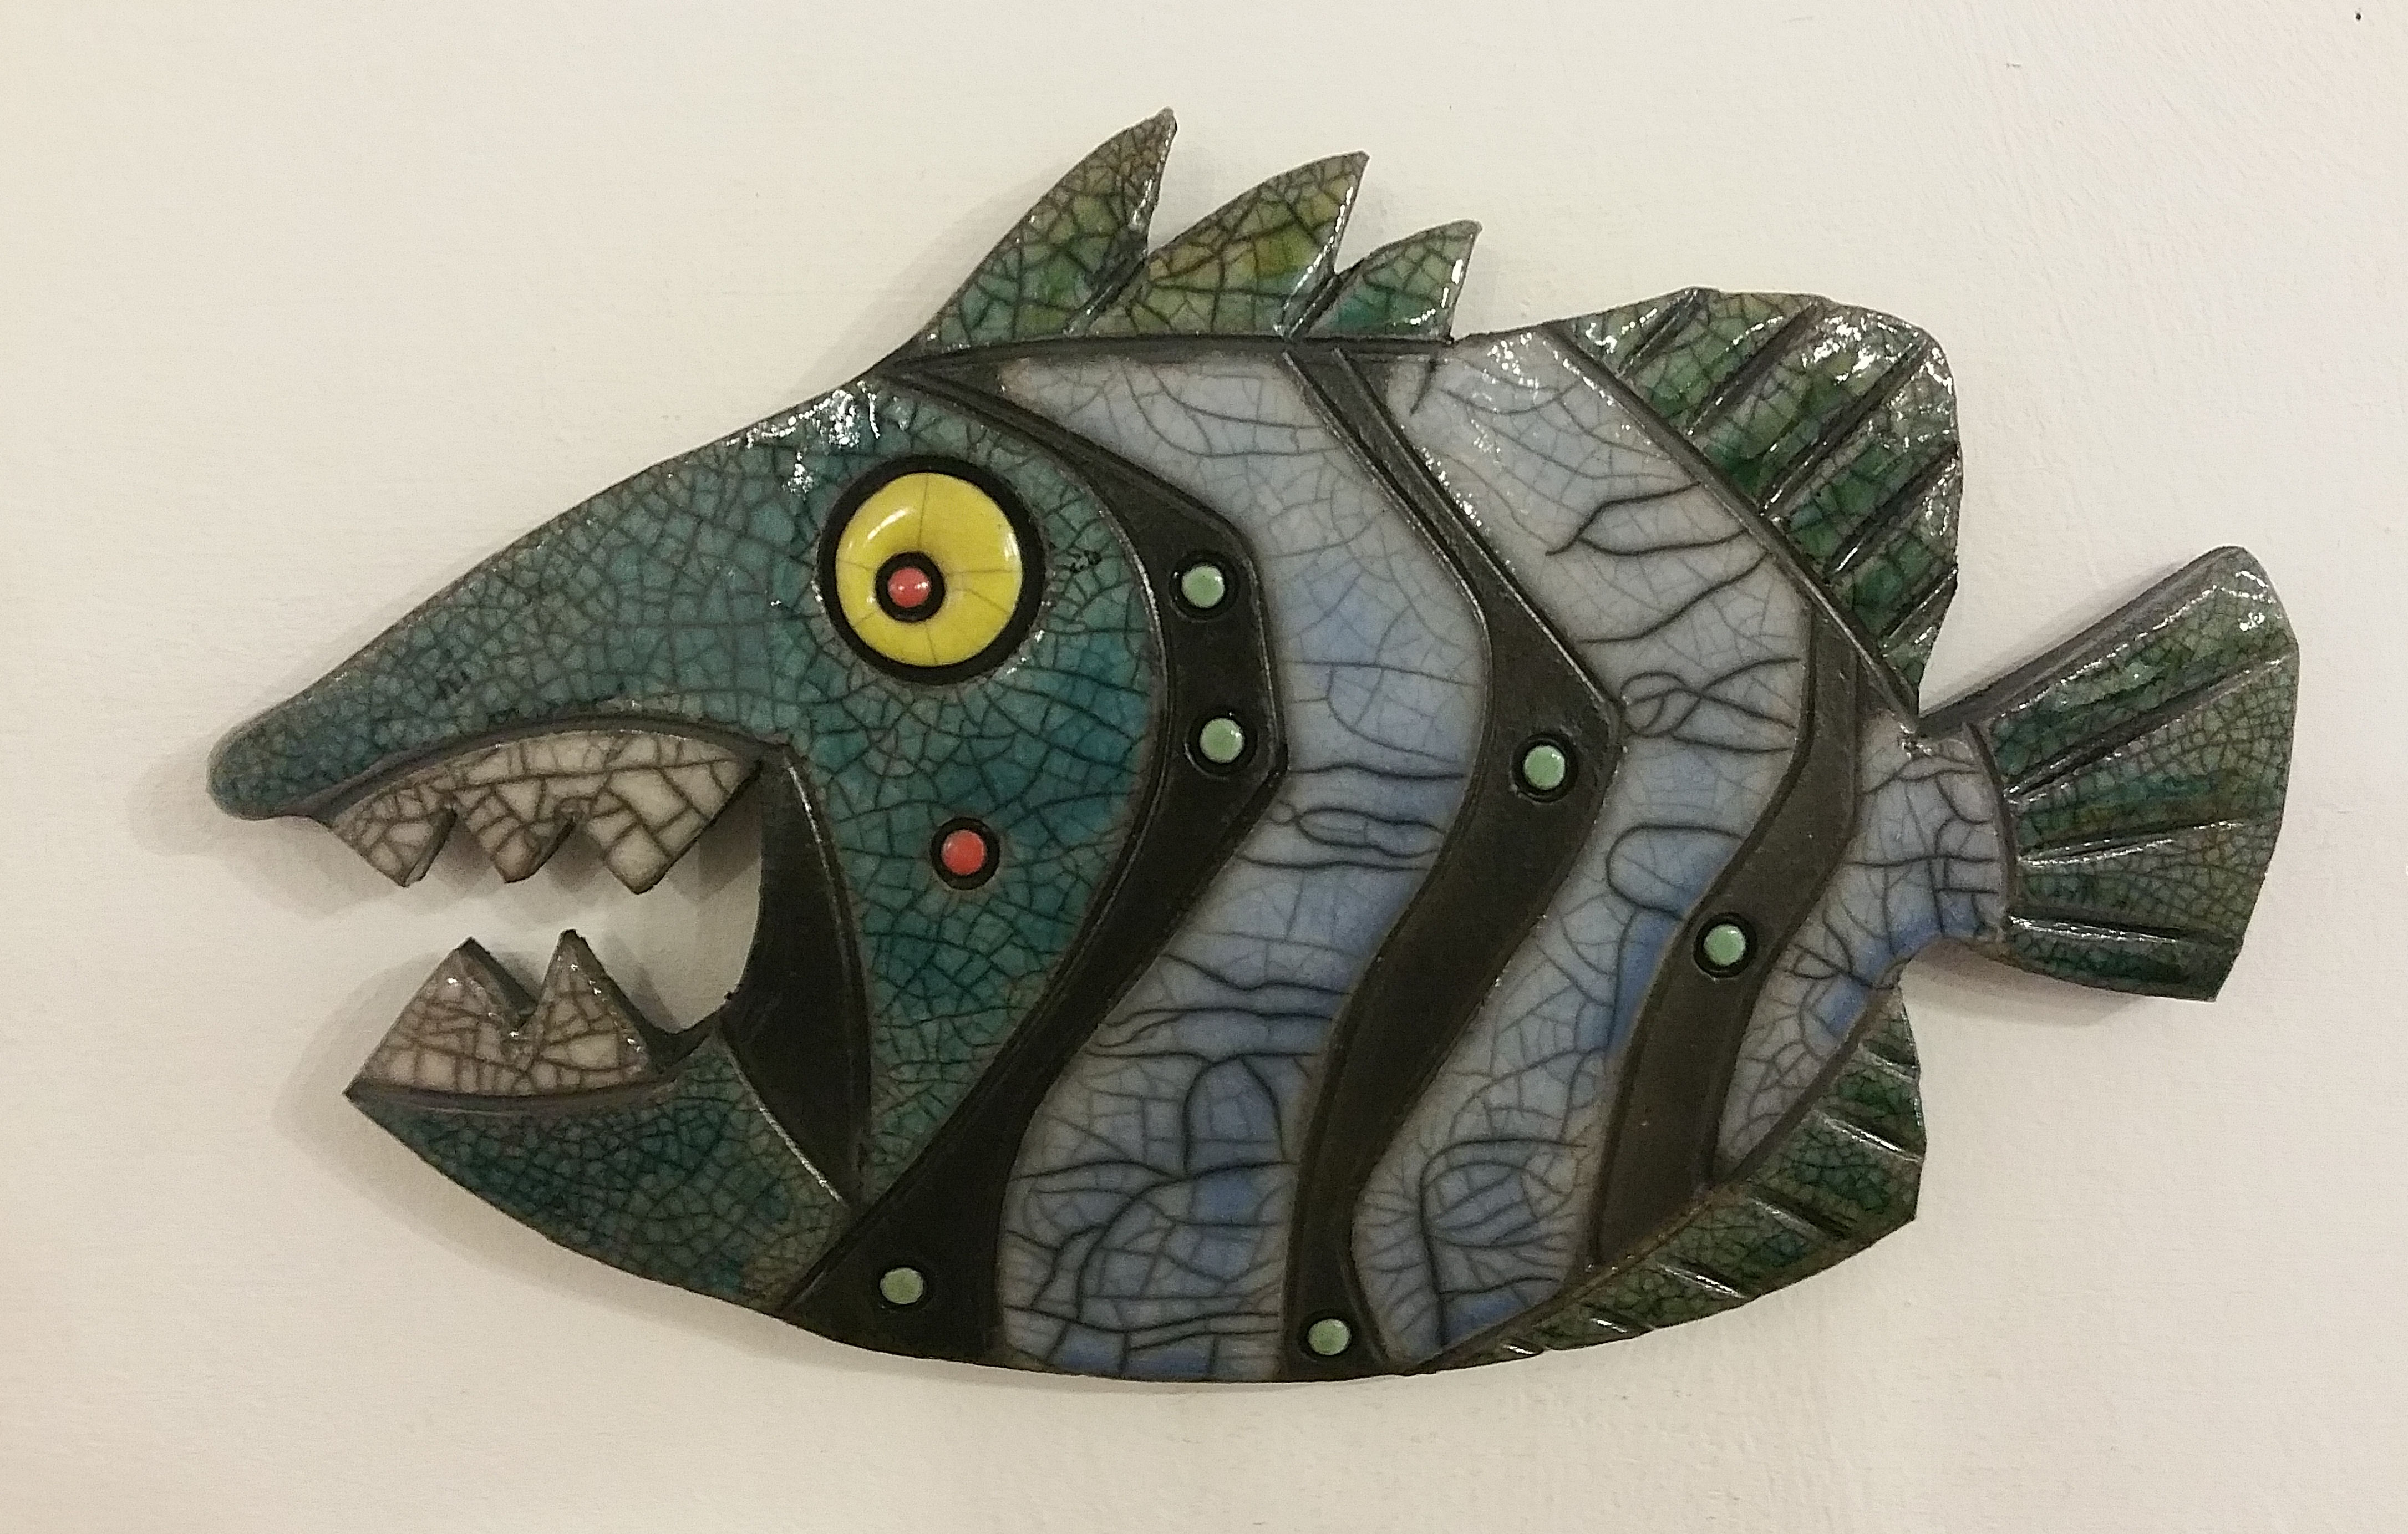 'Angry Fish IV' by artist Julian Smith